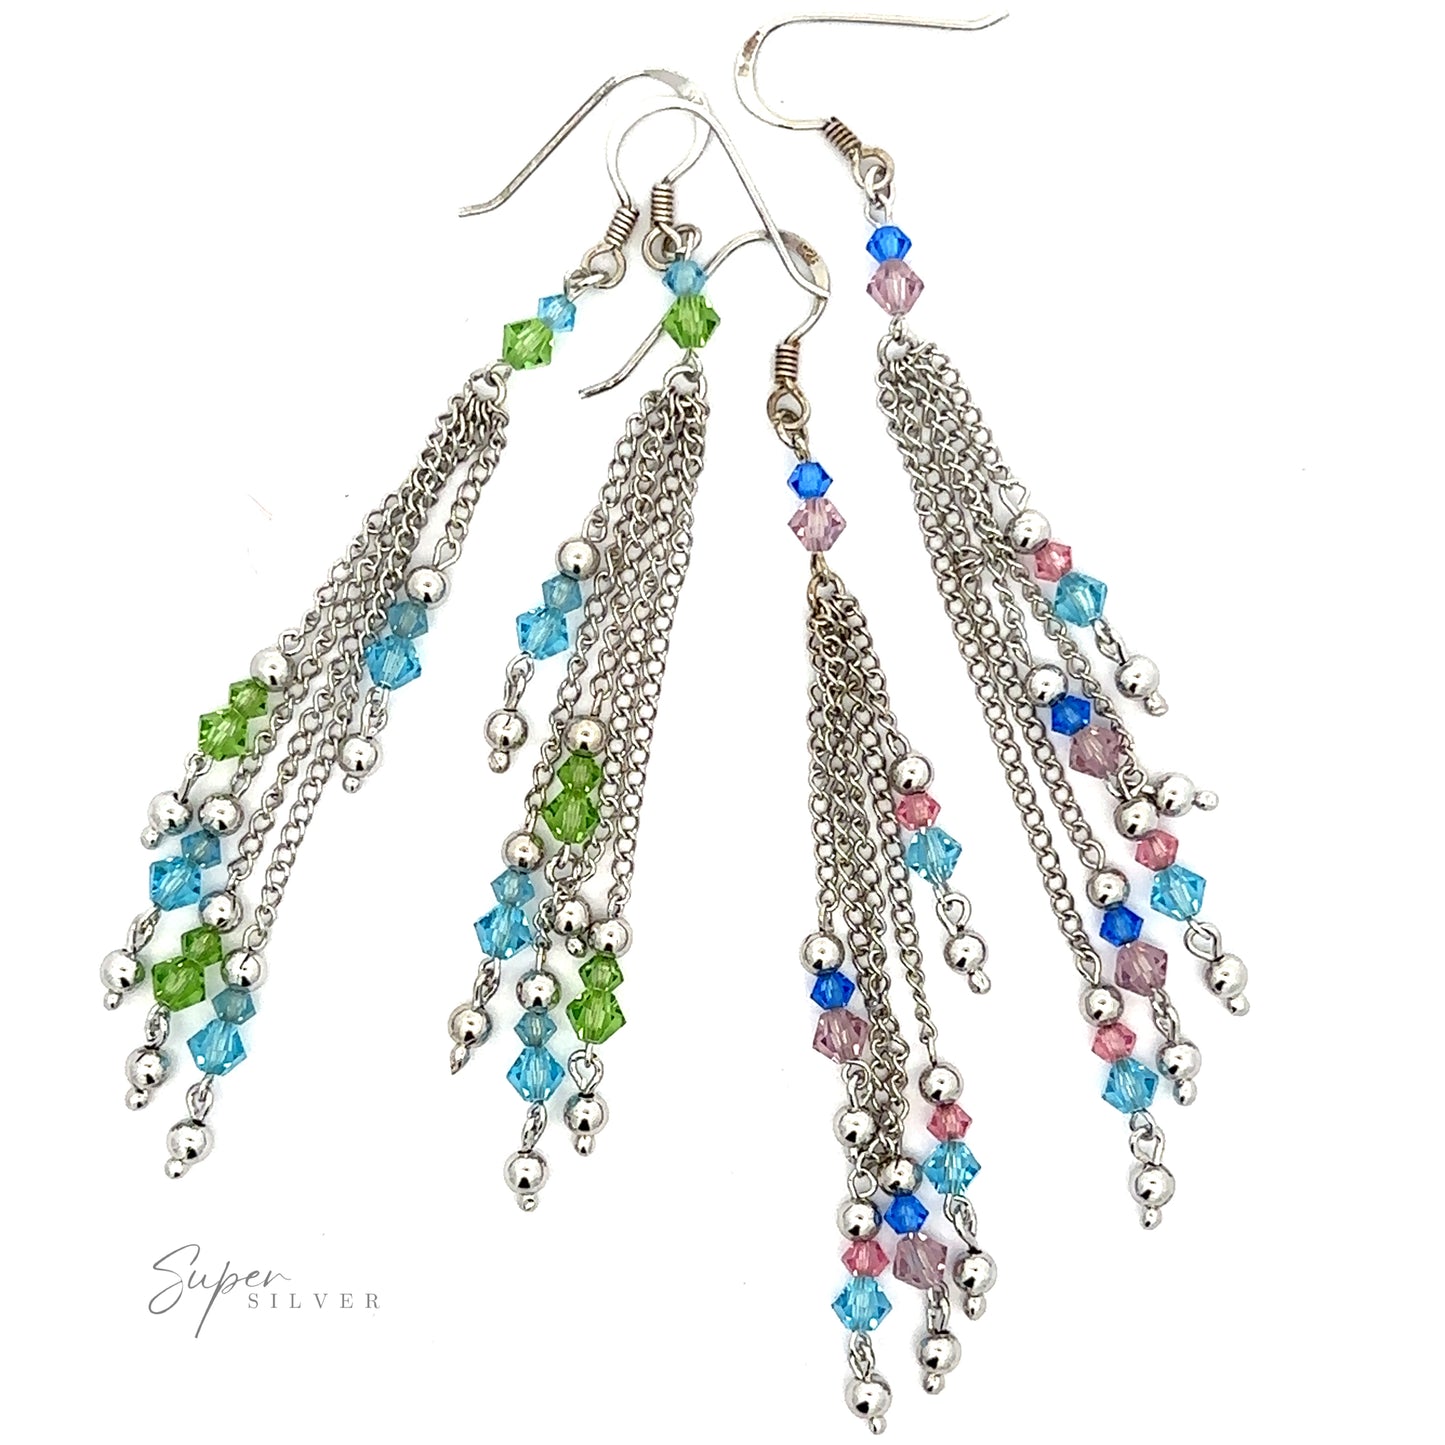 
                  
                    Layered Earrings with Multicolored Beads feature a sterling silver chain adorned with multicolored beads in blue, green, pink, and clear. Set against a white background.
                  
                